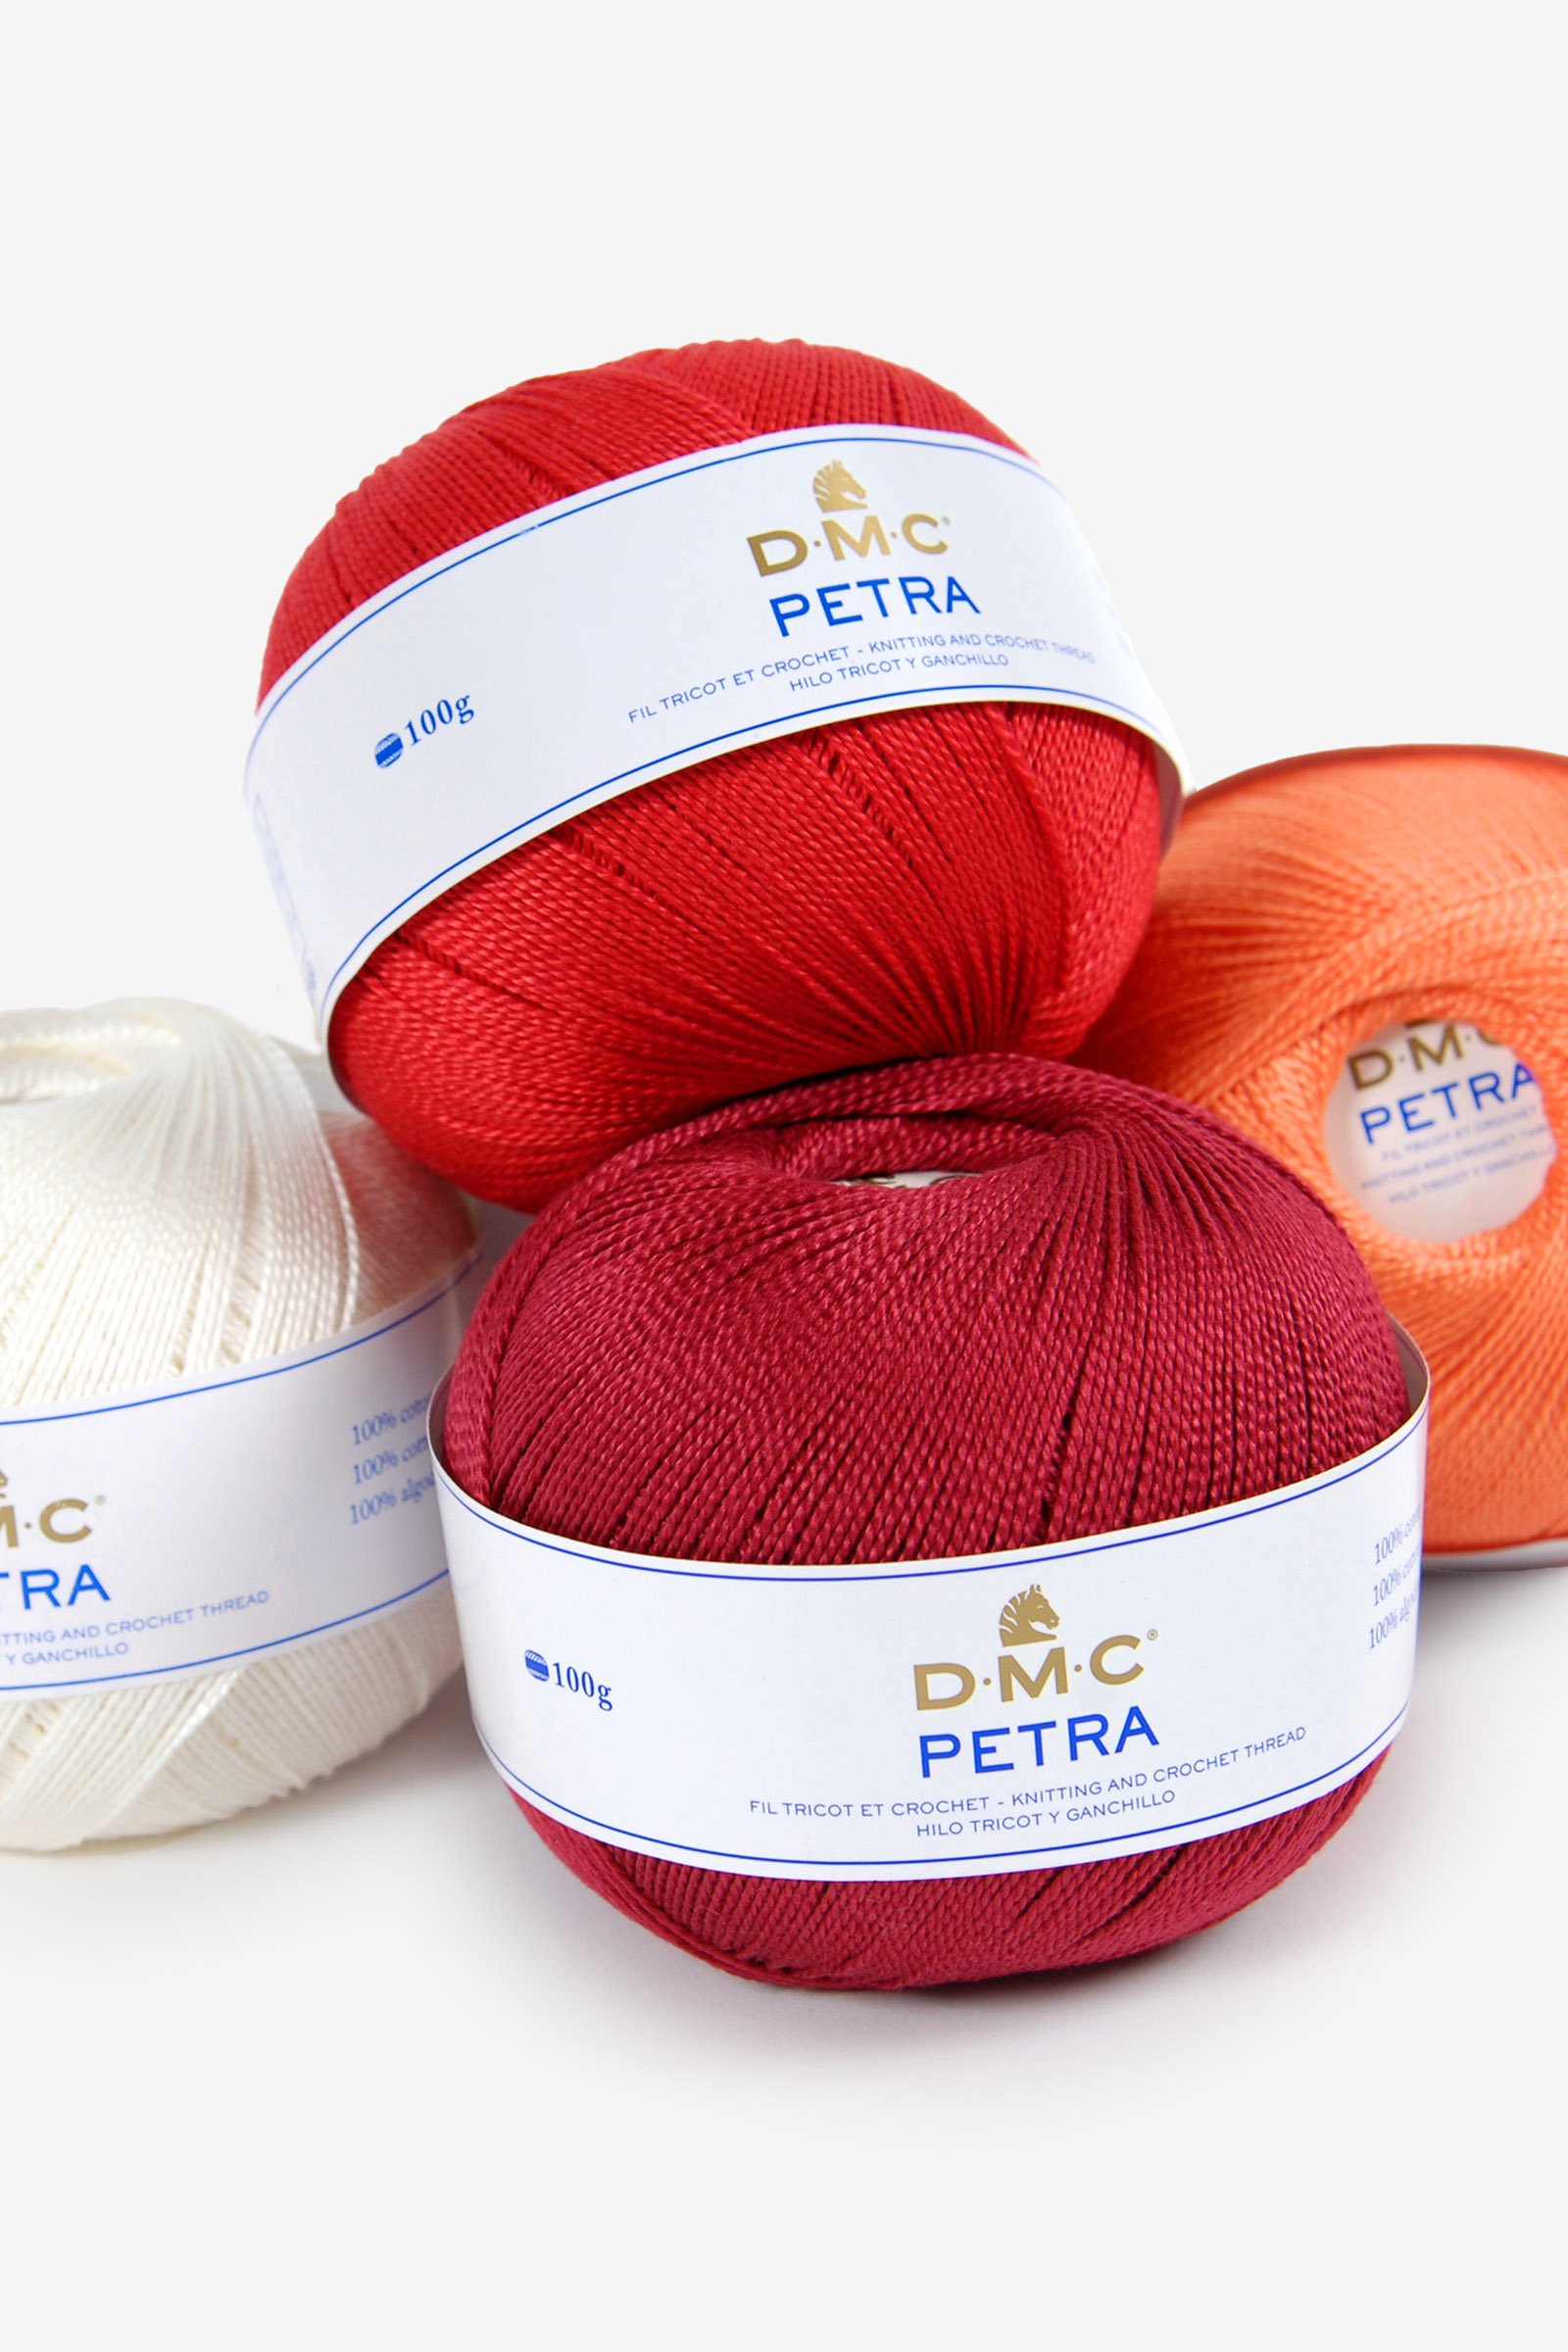 Petra Cotton Thread Size 5 - 100g/437 yds - 33 colors Available